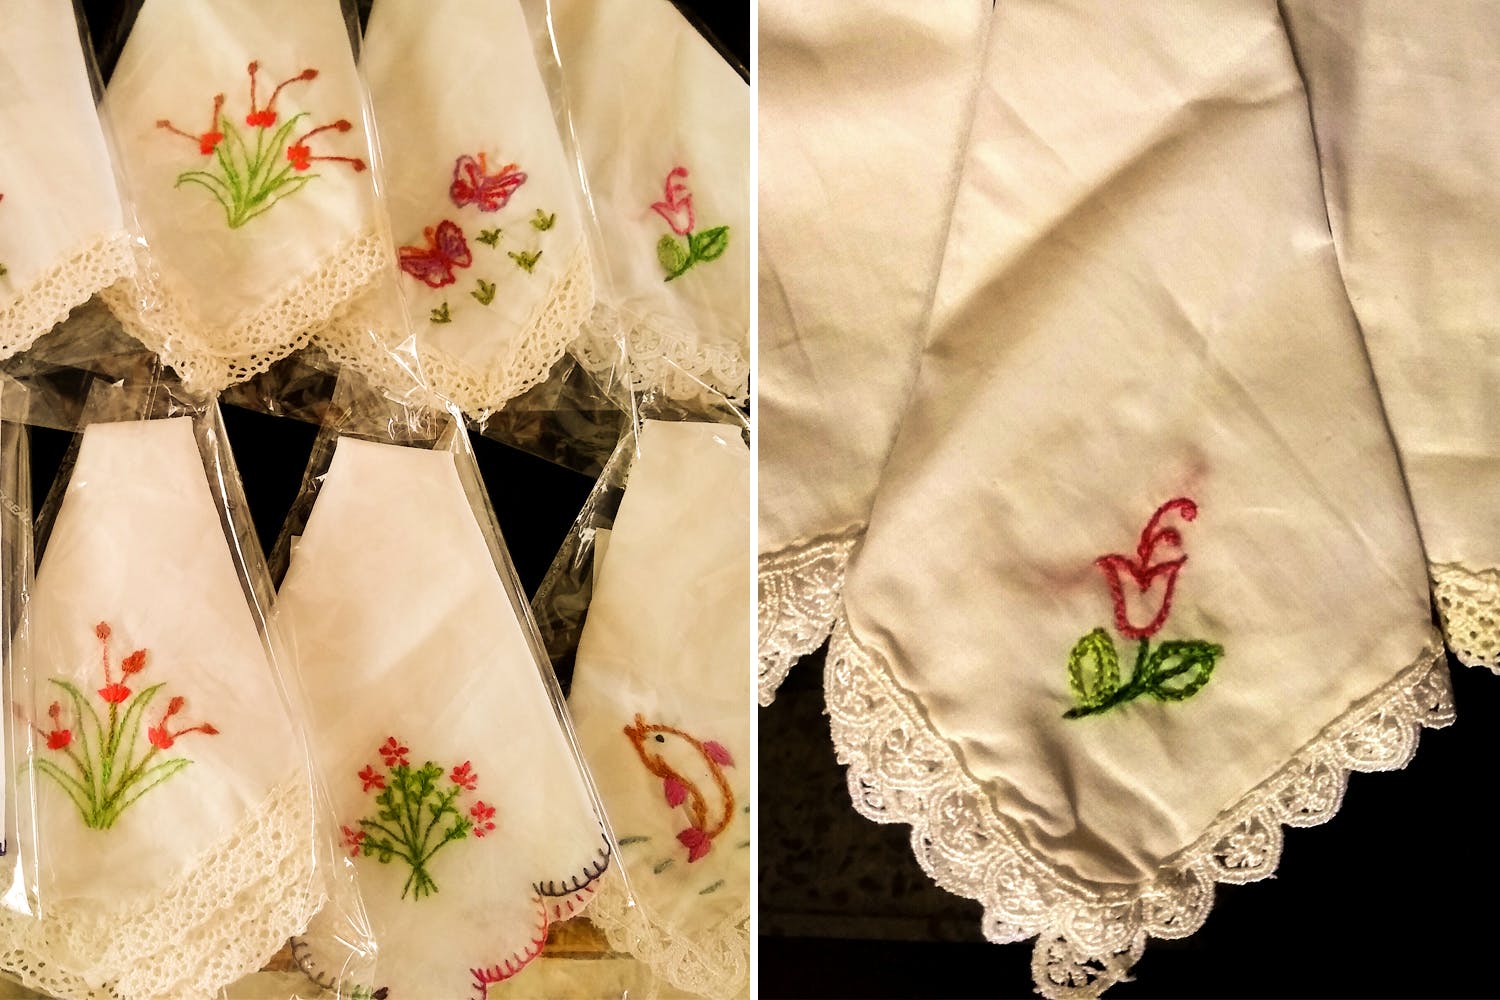 Textile,Napkin,Lace,Handkerchief,Linens,Embroidery,Fashion accessory,Needlework,Tablecloth